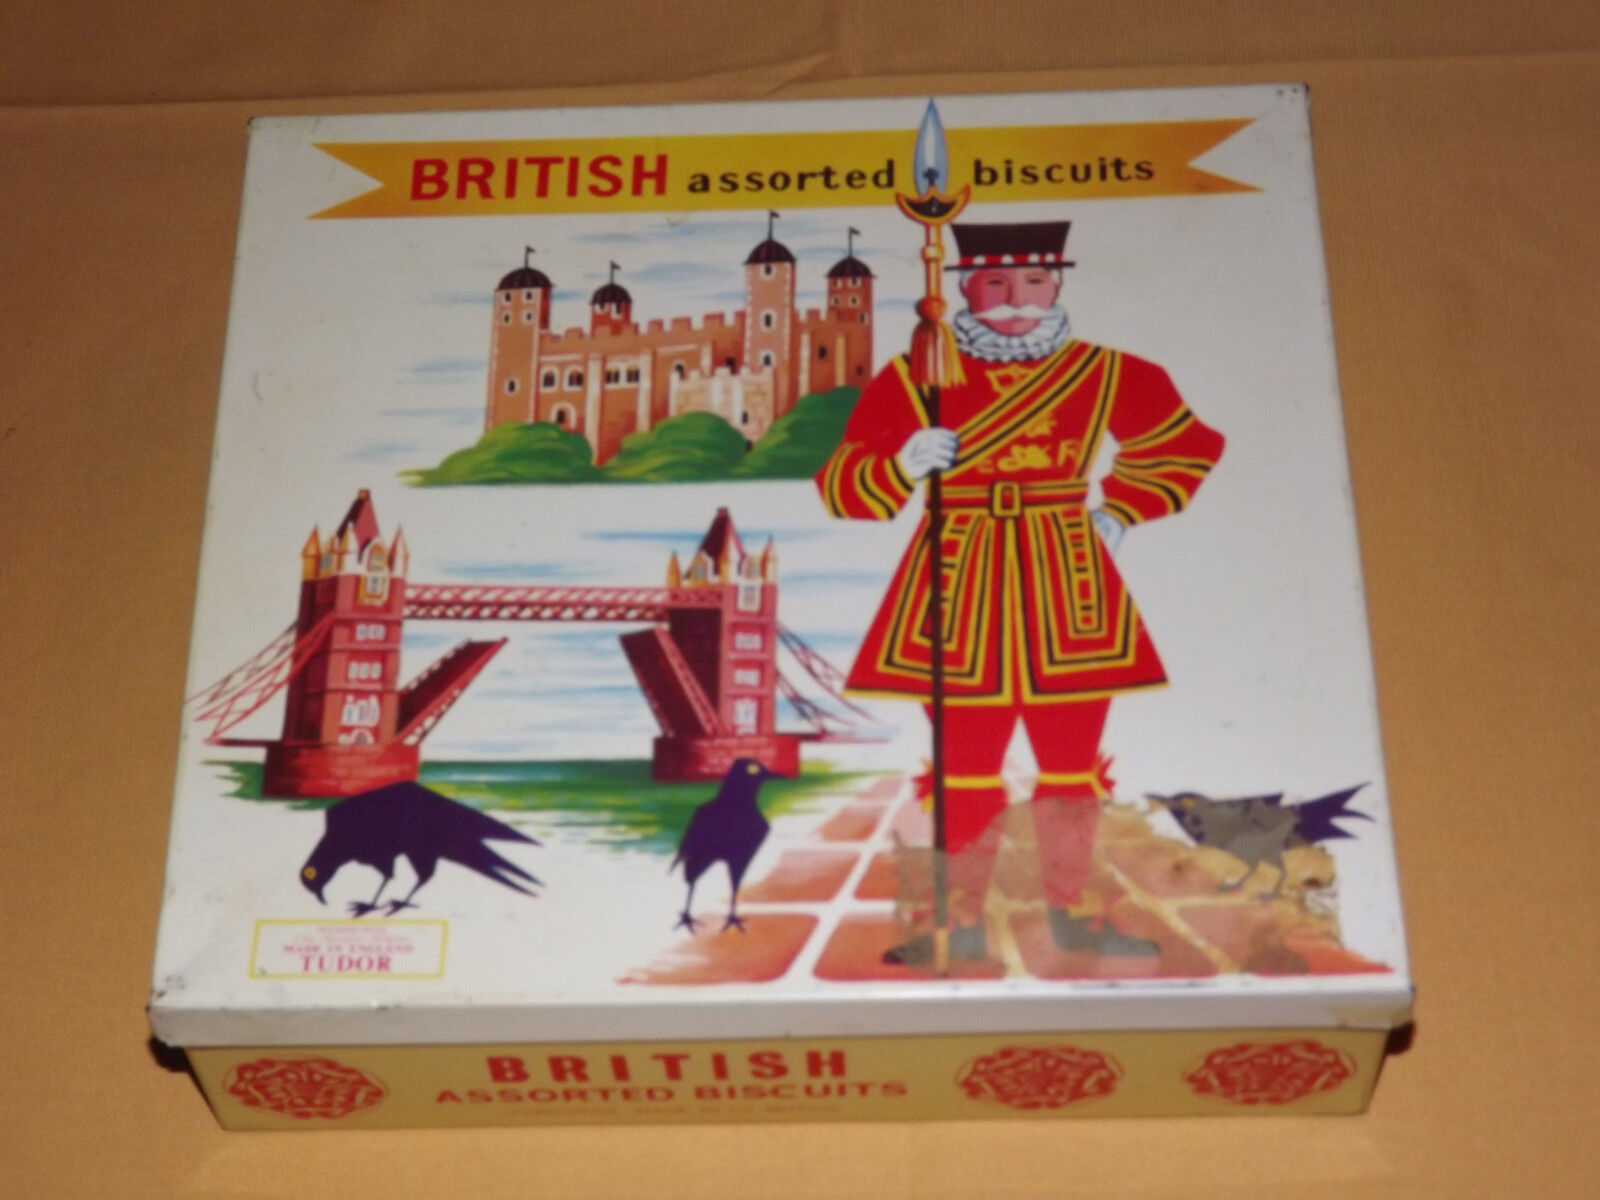 VINTAGE ADVERTISING MADE IN ENGLAND TUDOR BRITISH ASSORTED BISCUITS TIN